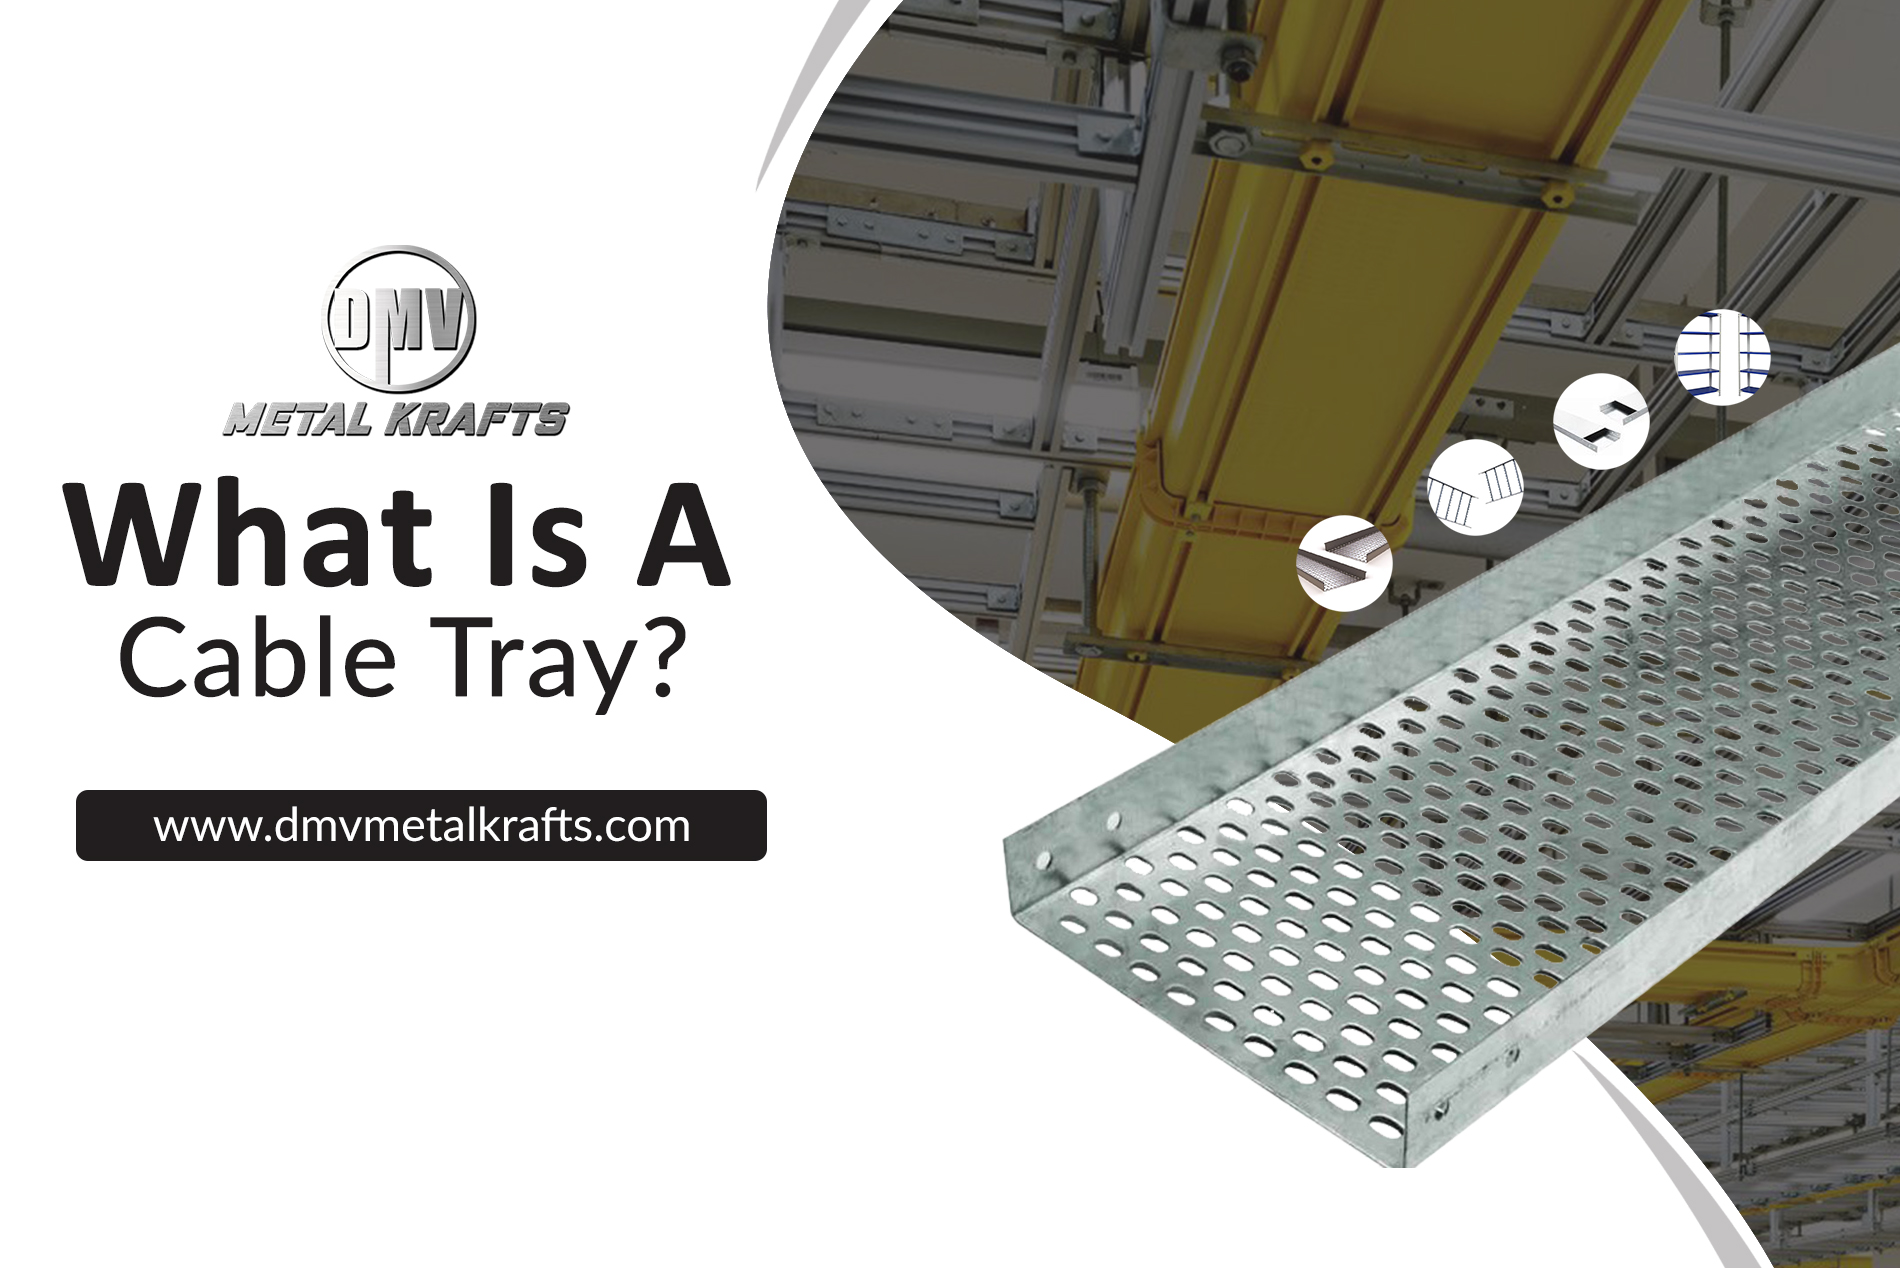 What Is A Cable Tray?